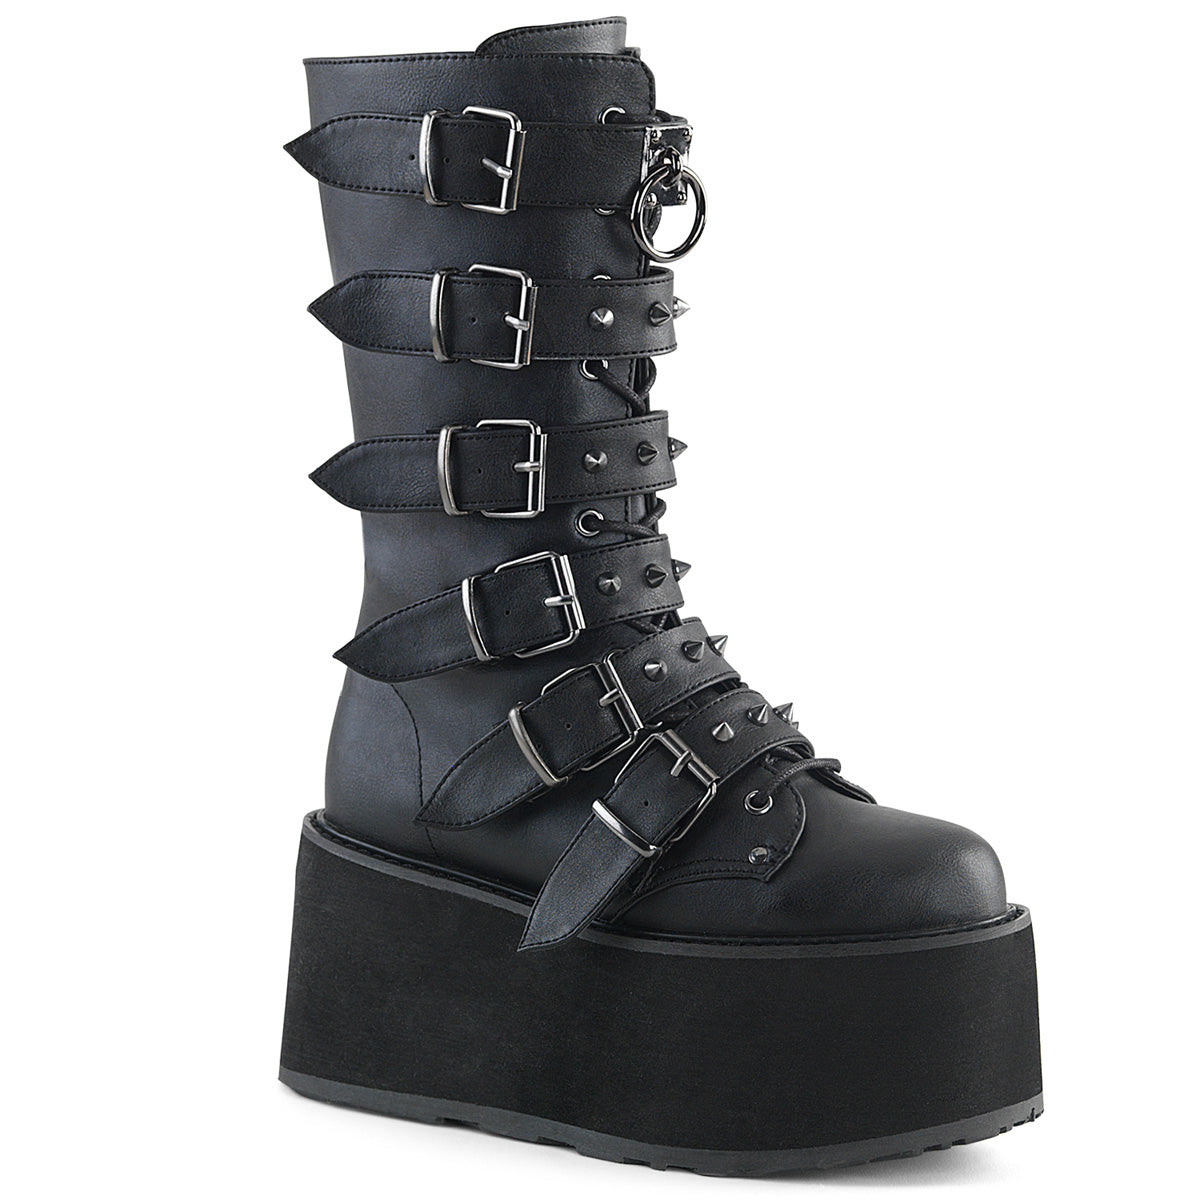 DAMNED-225 Black Mid-Calf Boots